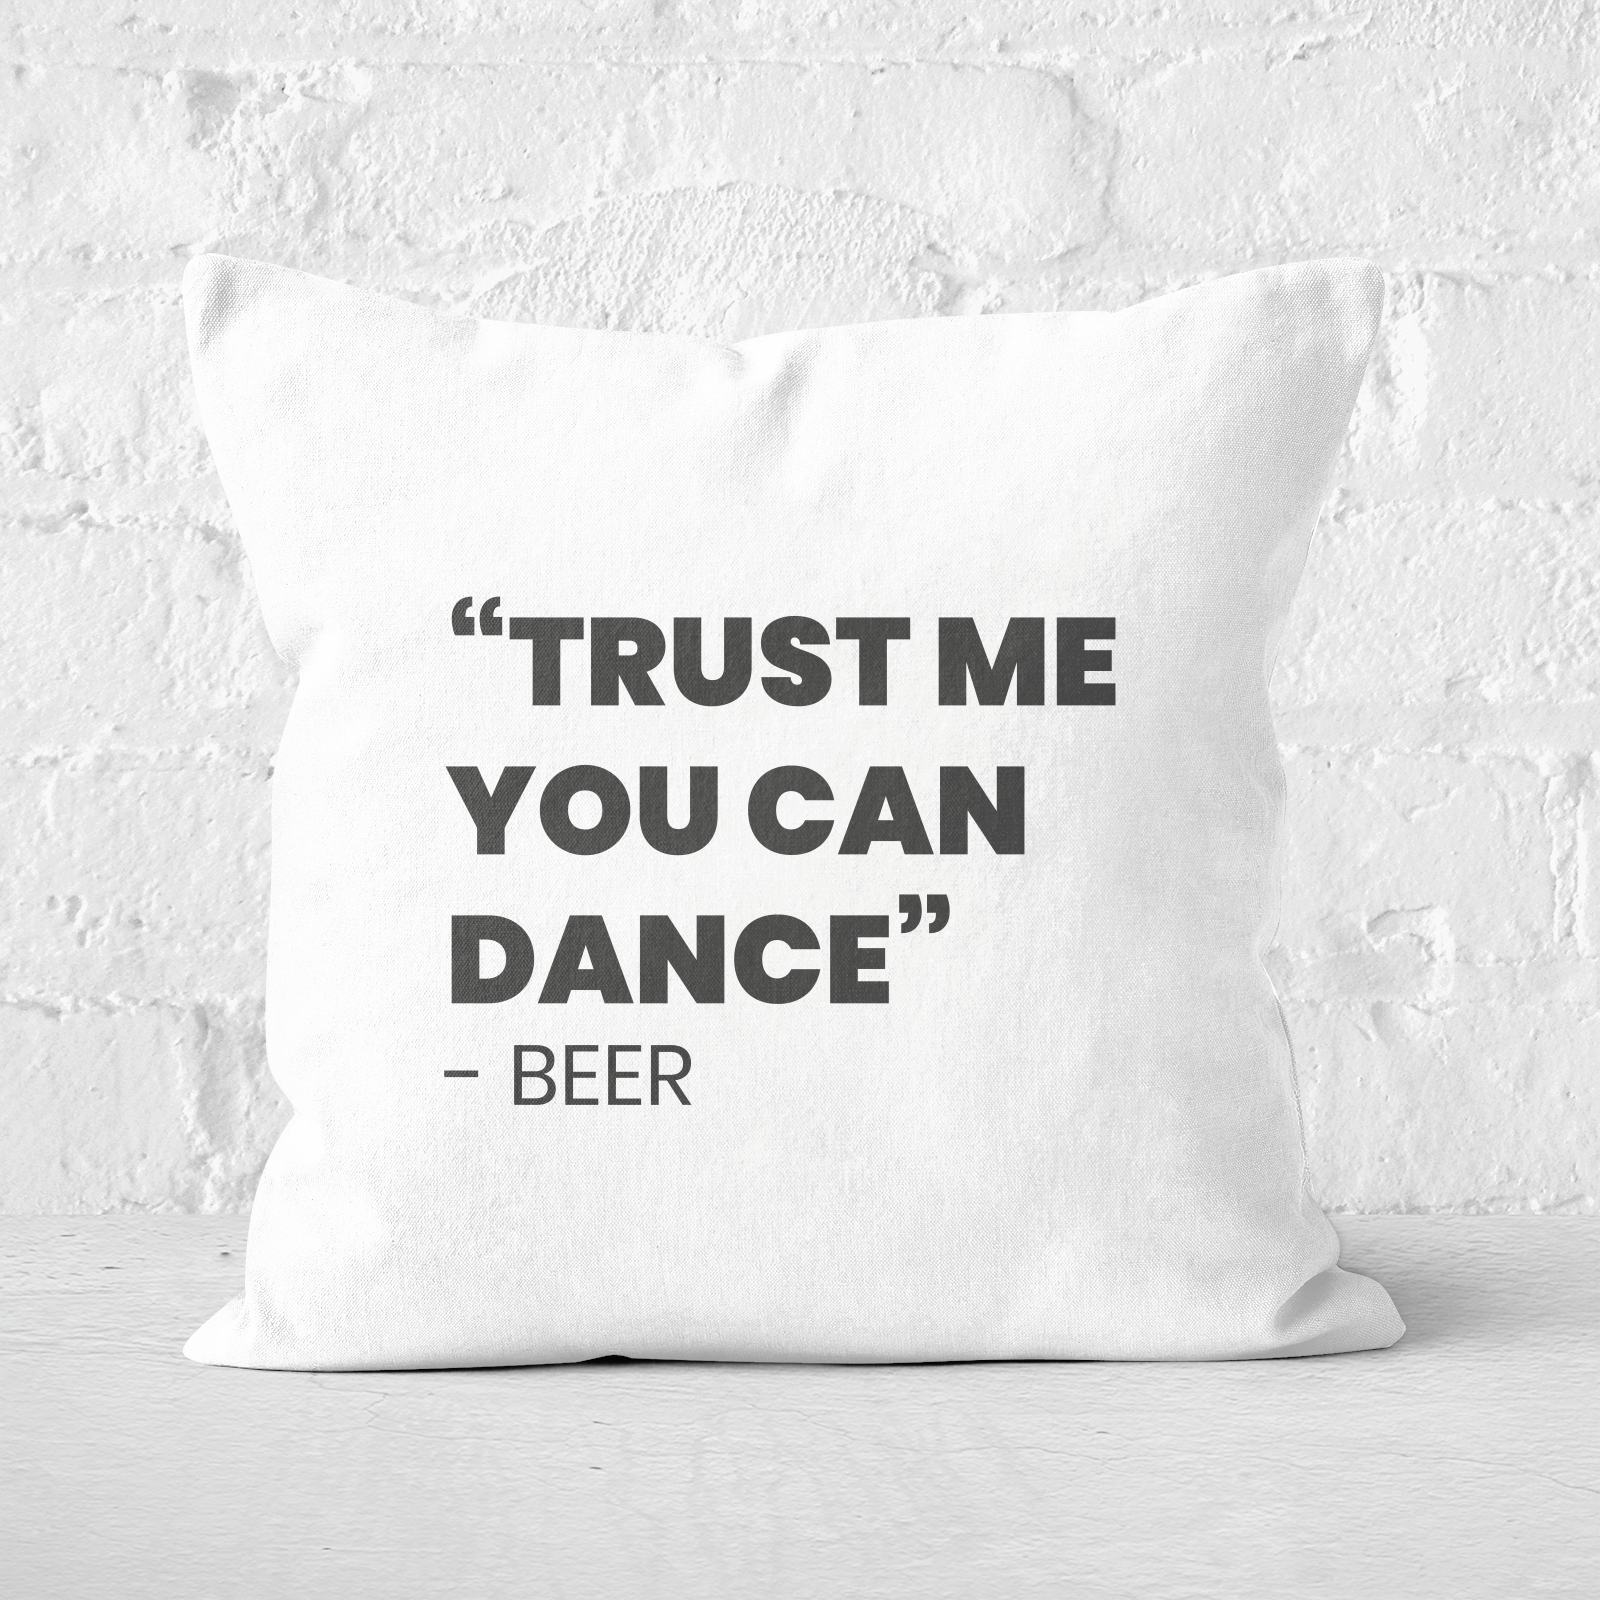 Trust Me You Can Dance - Beer Square Cushion - 60x60cm - Soft Touch